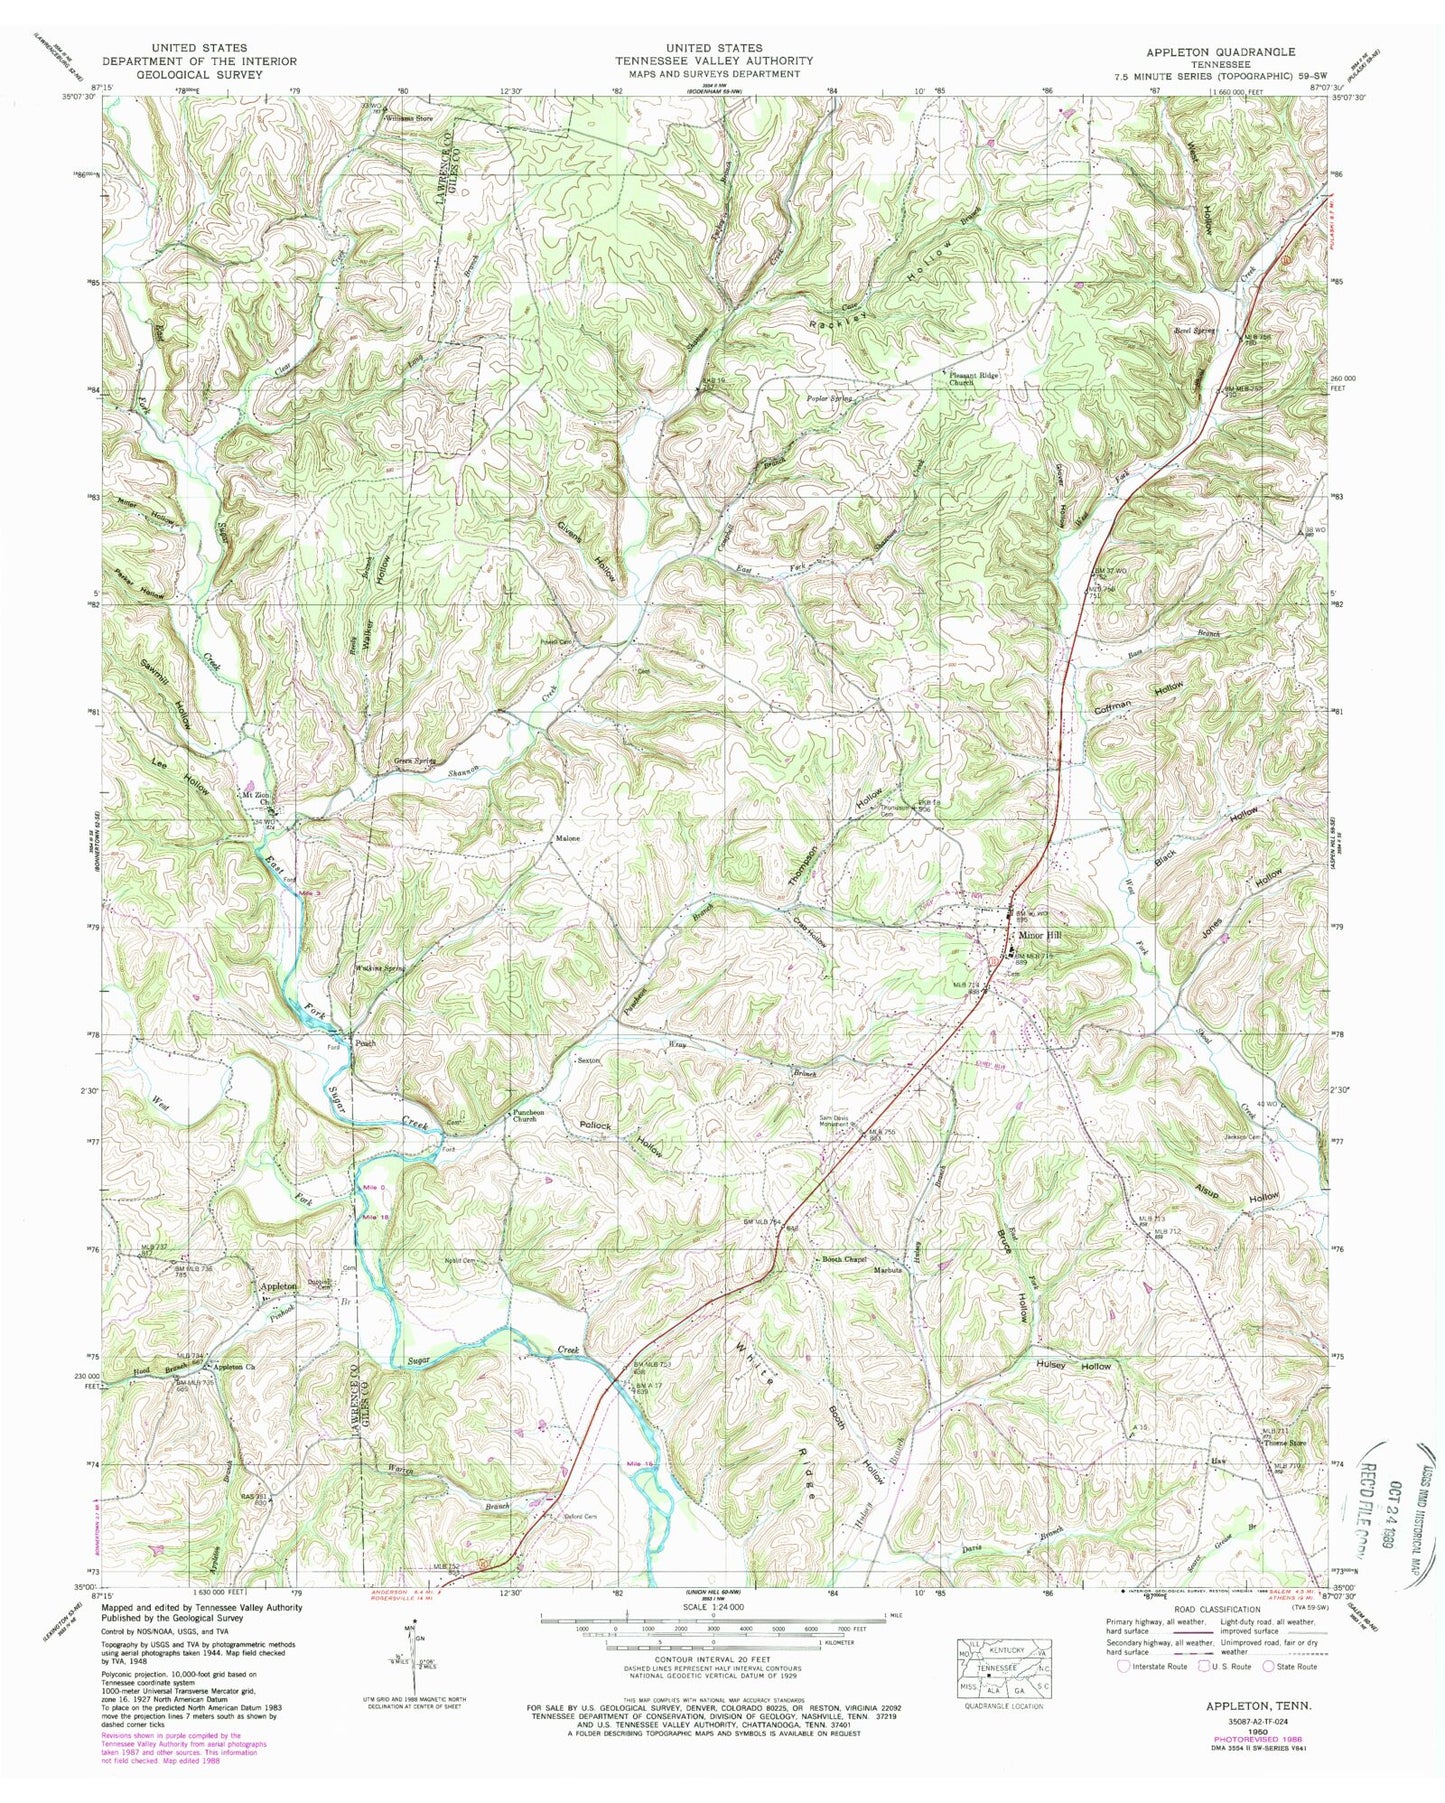 Classic USGS Appleton Tennessee 7.5'x7.5' Topo Map Image